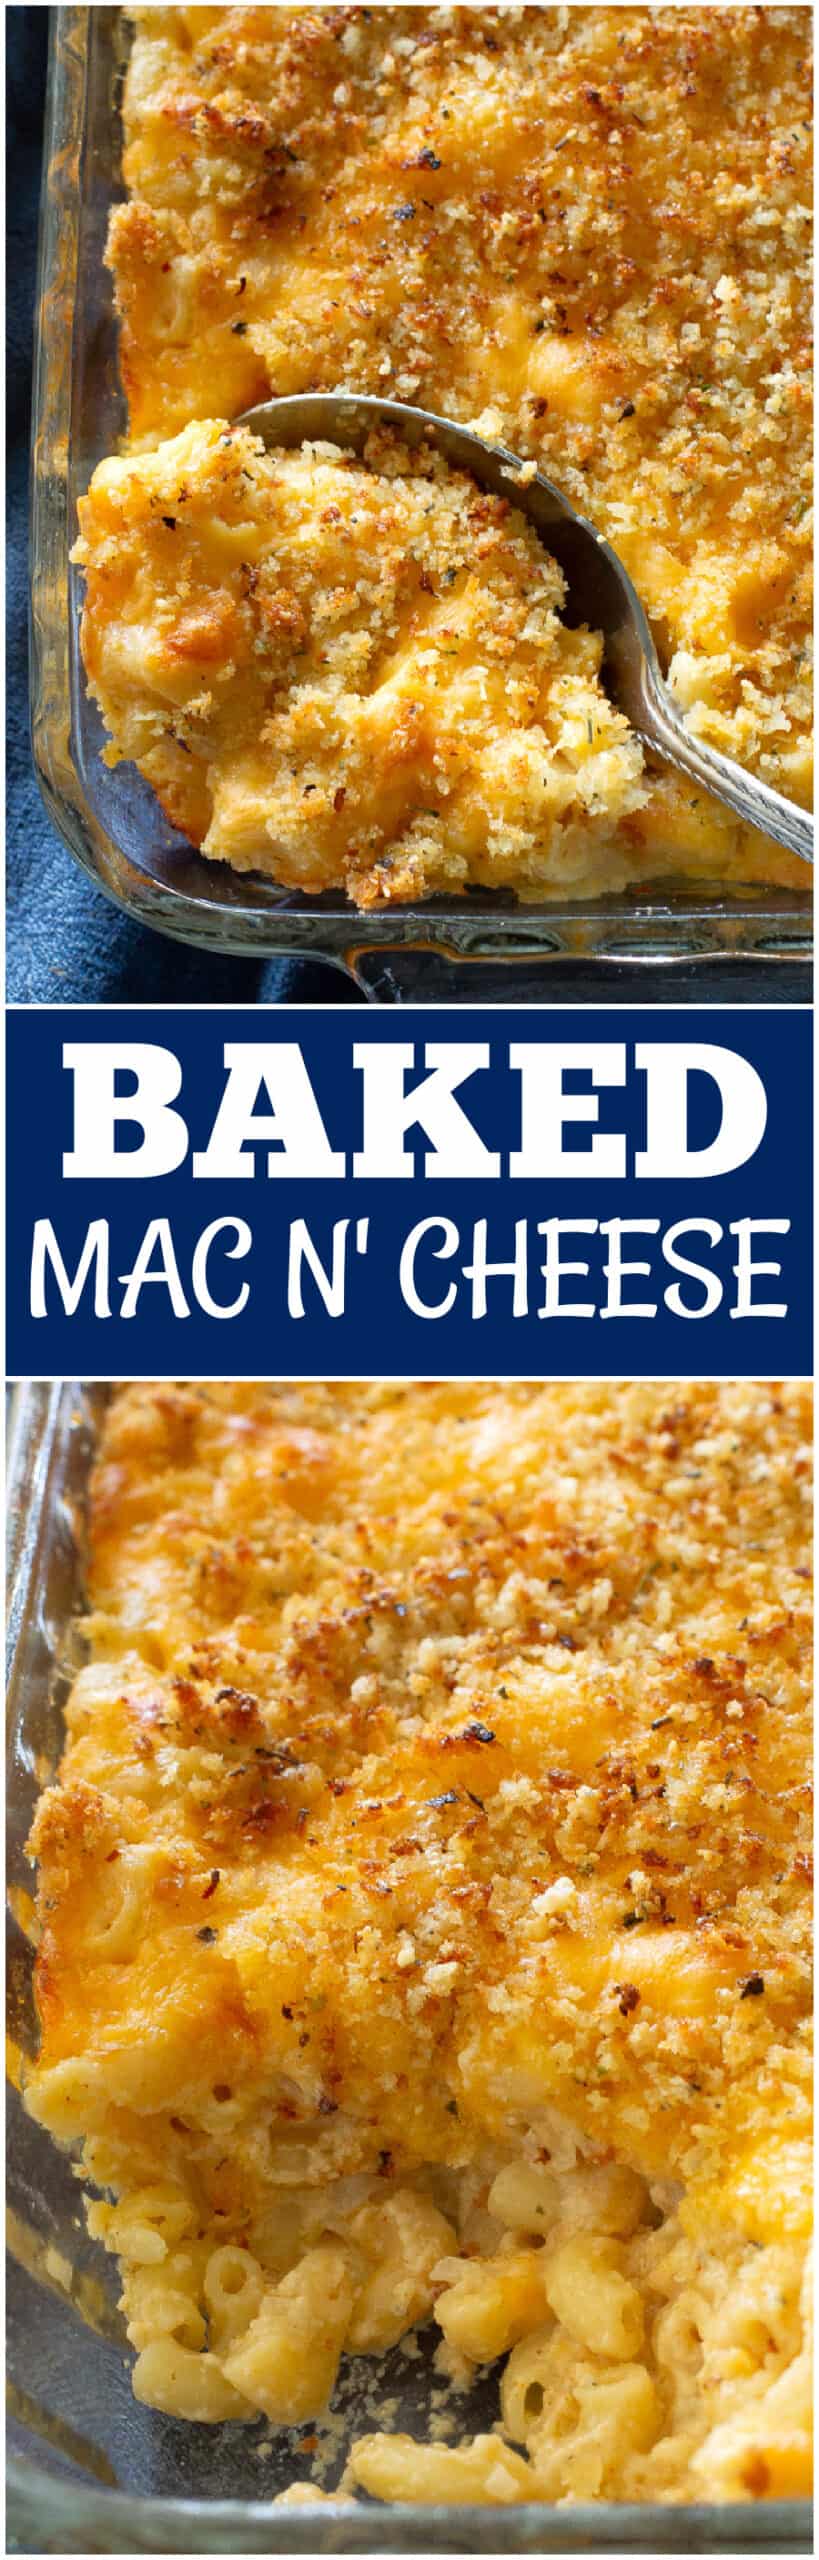 baked mac n cheese scaled - Baked Mac and Cheese